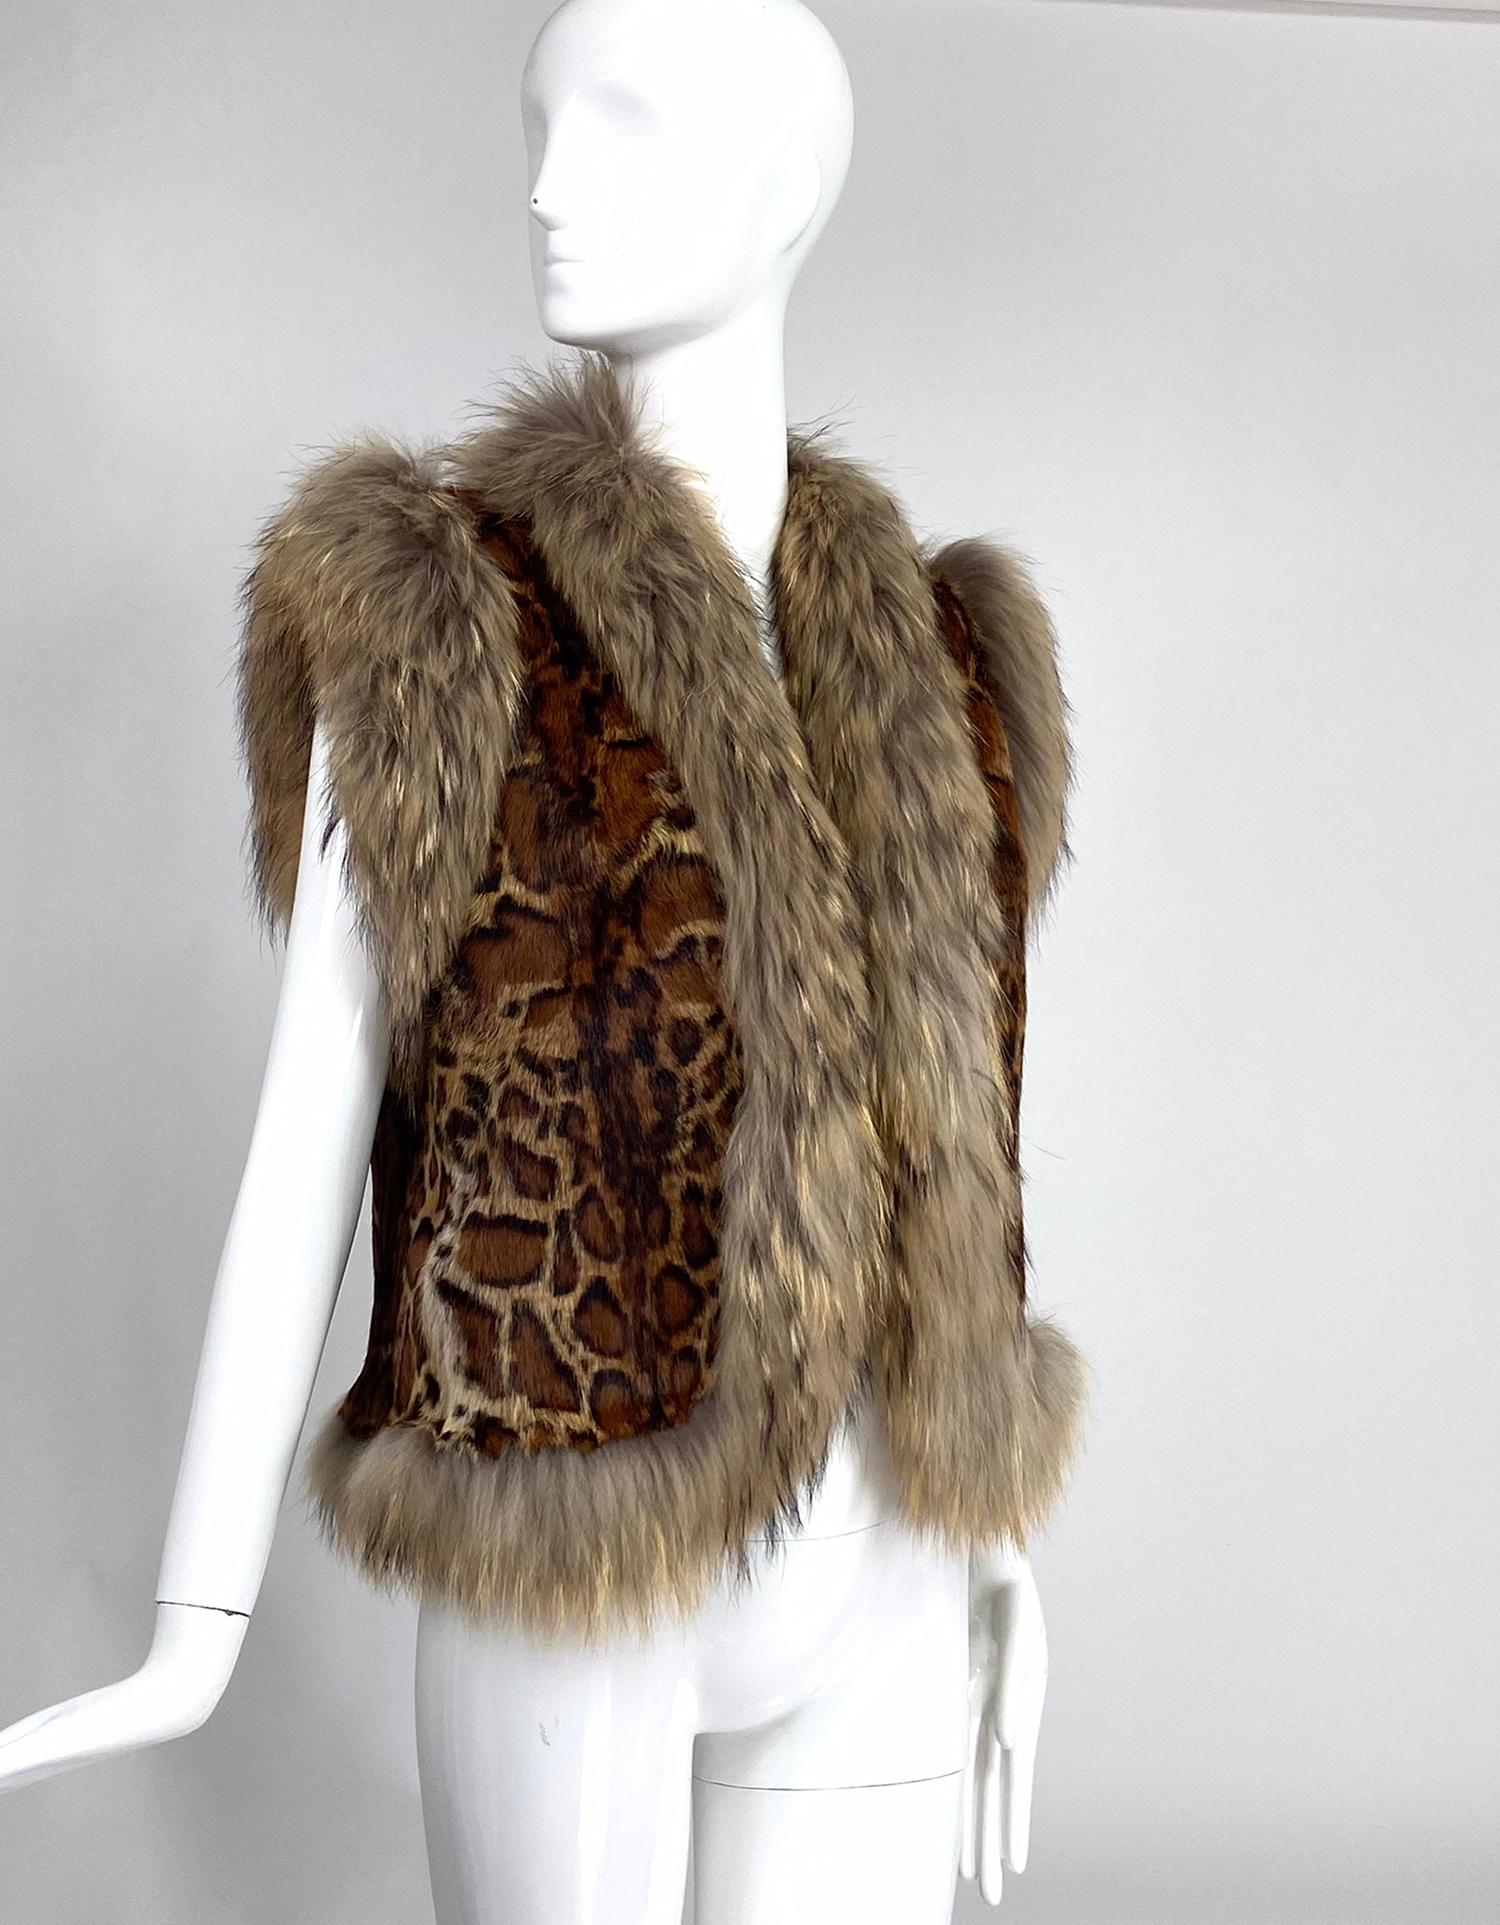 Vintage fox fur & stenciled faux ocelot fury gilet from the 1970s and purchased in France. Open front vest is trimmed at the facings with light soft fox fur, the body of the gilet is soft stenciled fur done to look like ocelot or similar. Fully